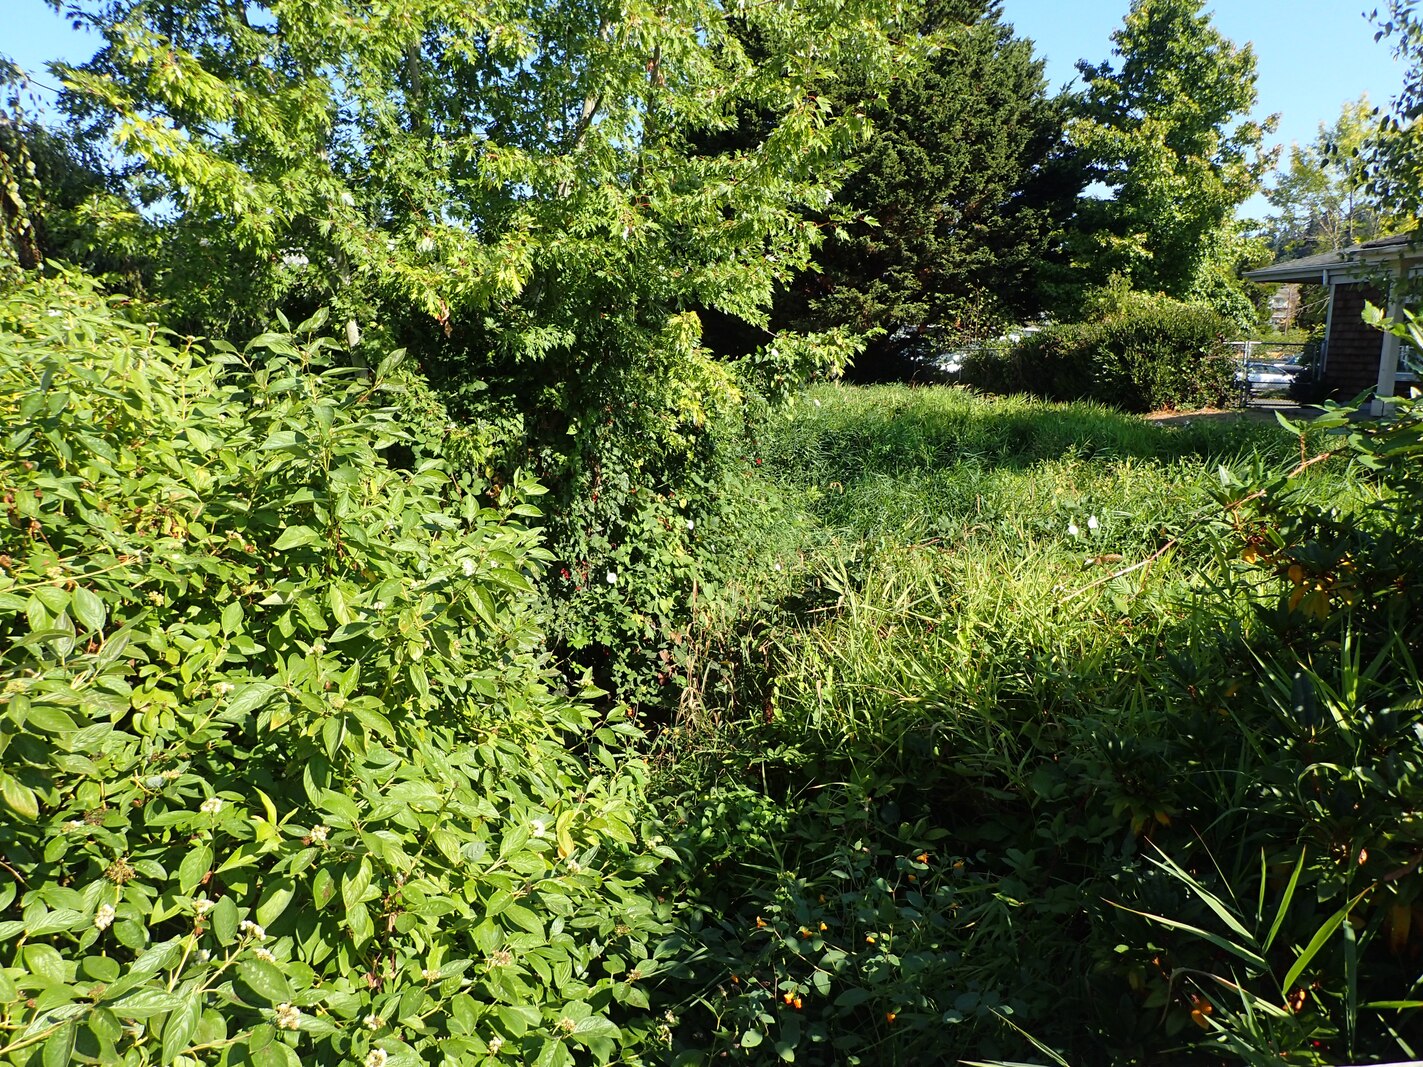 Photo of overgrown plants on trails and buildings around Hall Creek